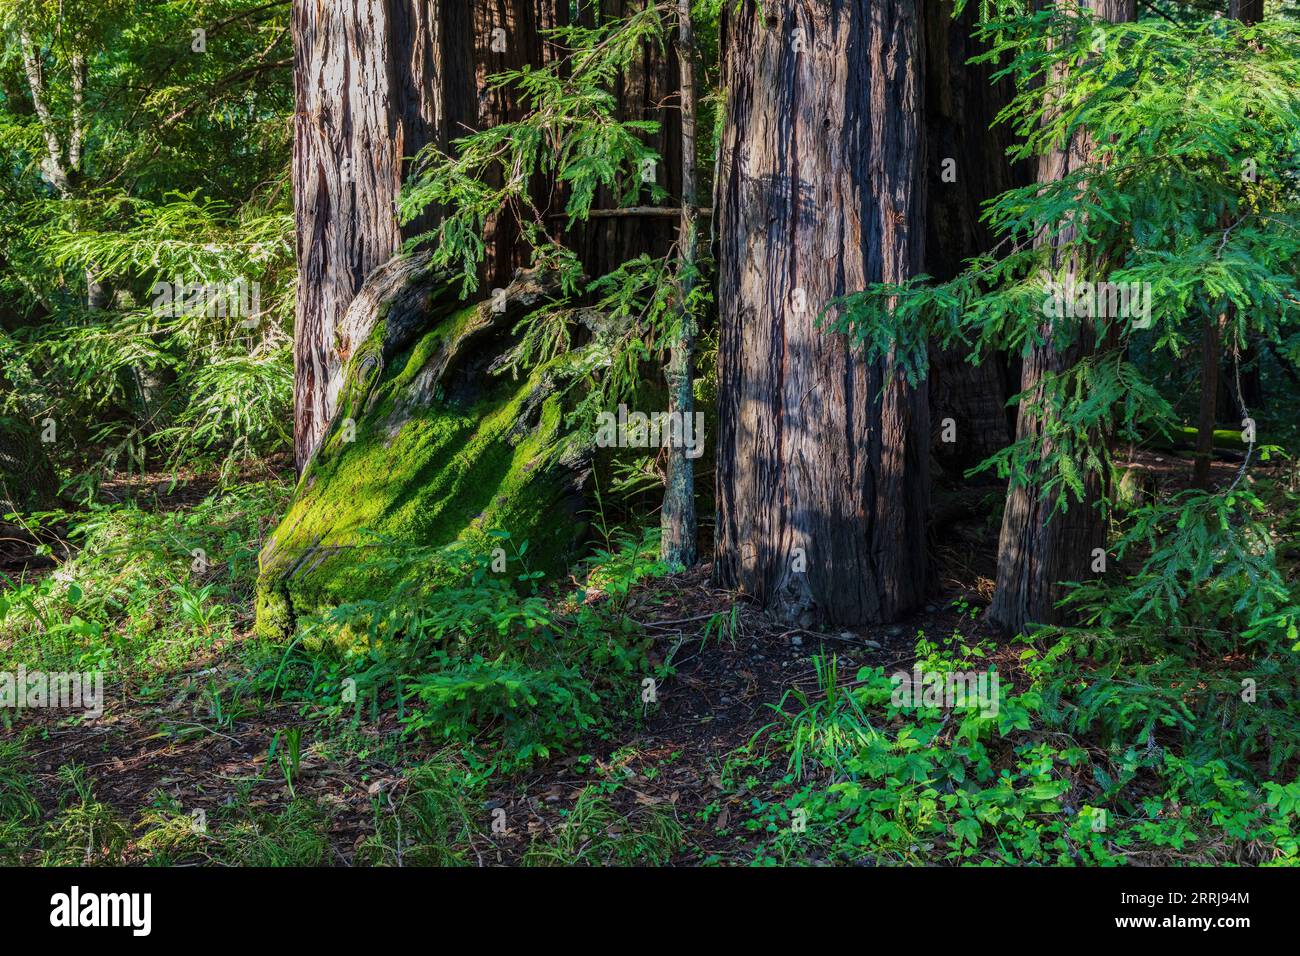 Redwood trees, Pfeiffer Big Sur State Park, California. The large trees are surrounded by green undergrowth. Stock Photo